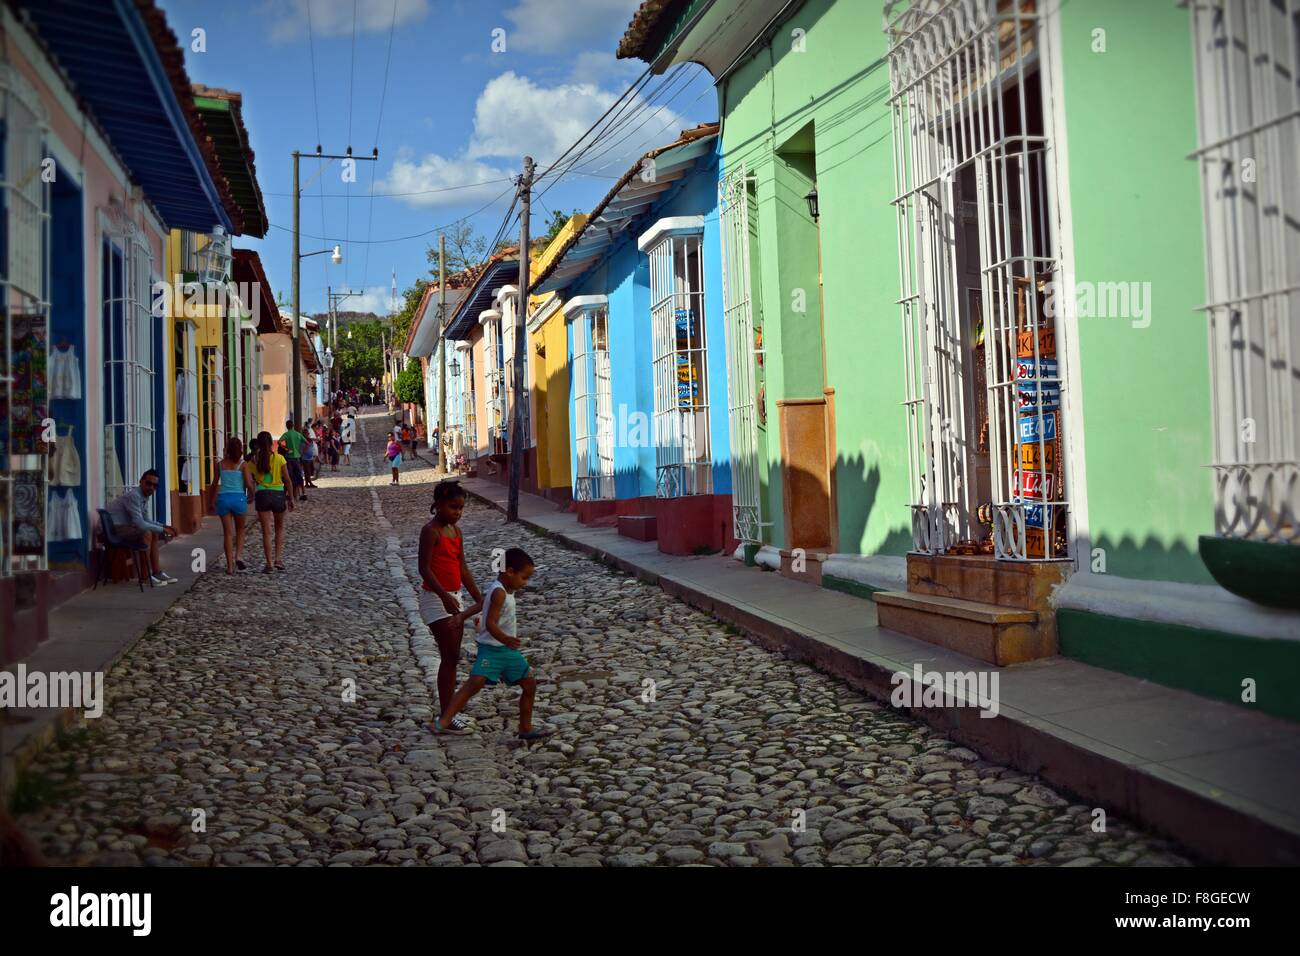 children playing on a cobbled street lined with colorful houses in Trinidad Sancti Spiritus Province Cuba Stock Photo